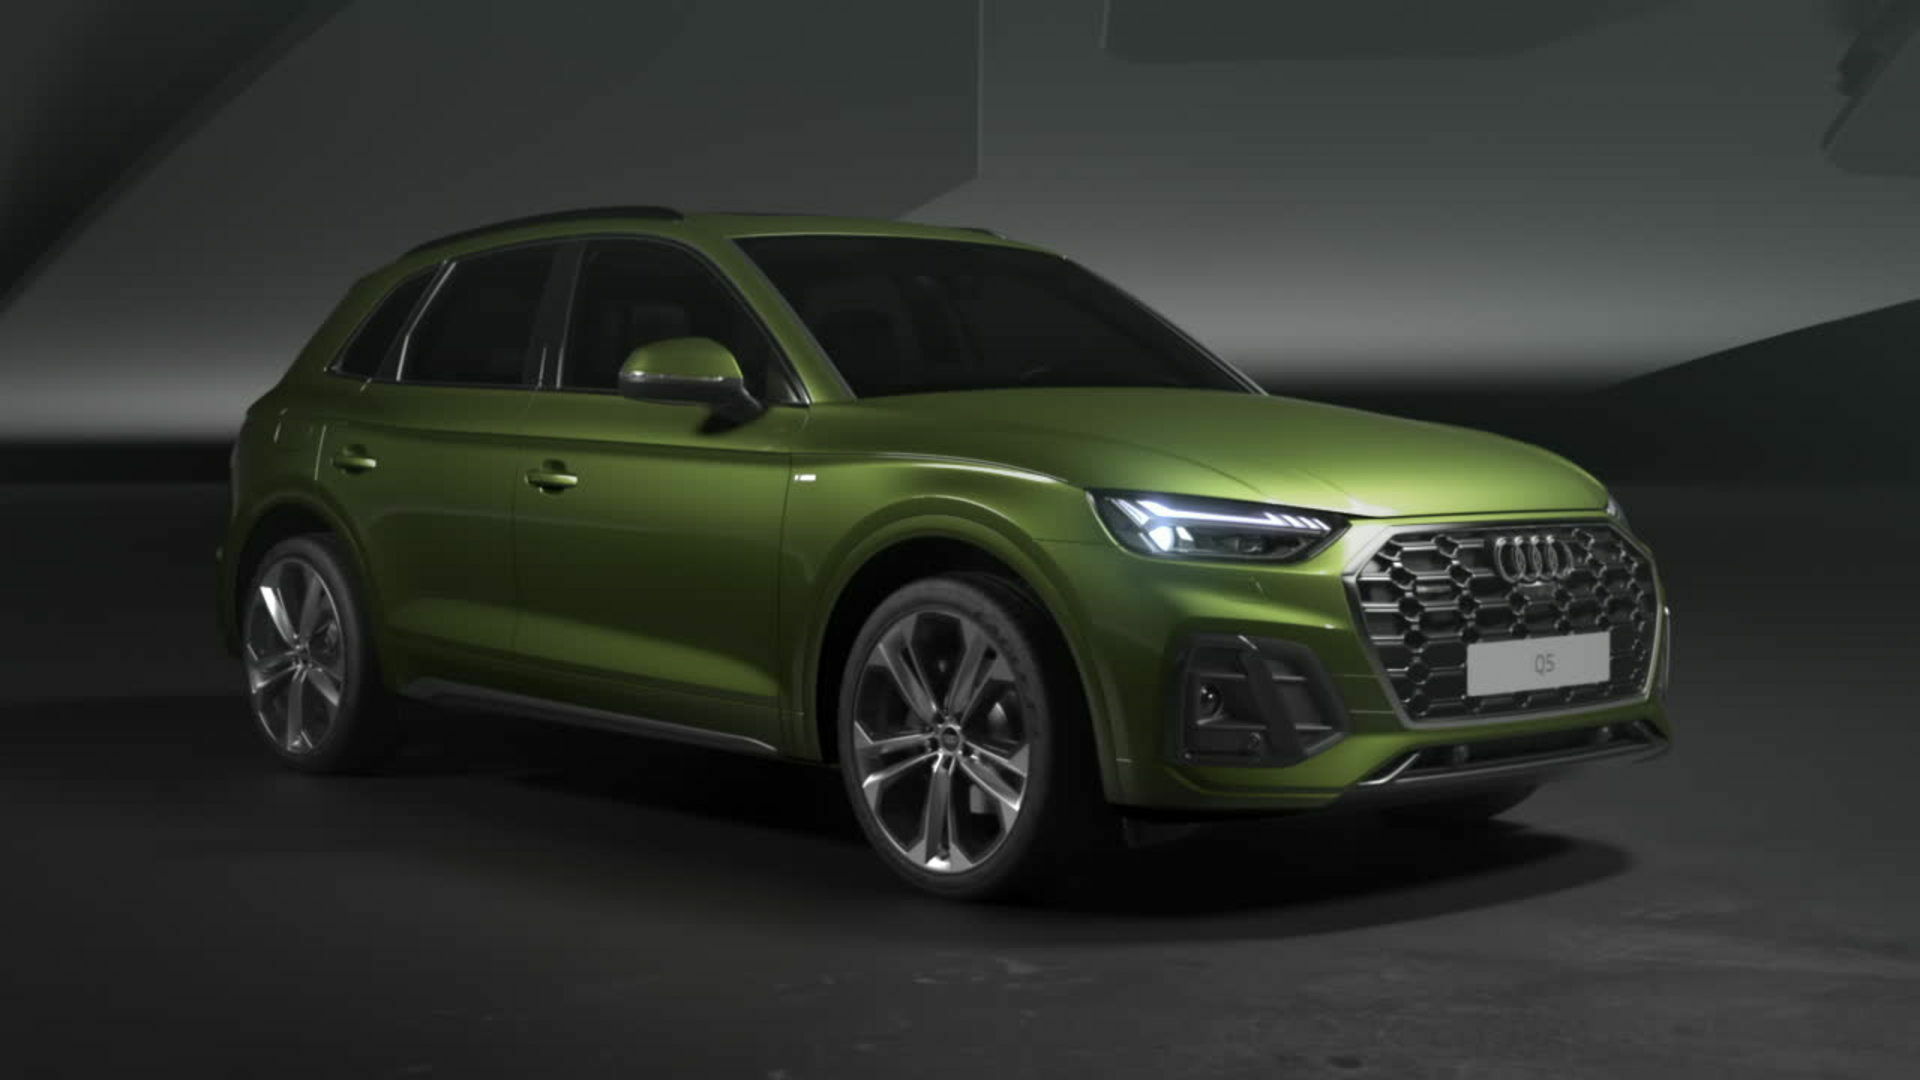 Animation: The design of the Audi Q5